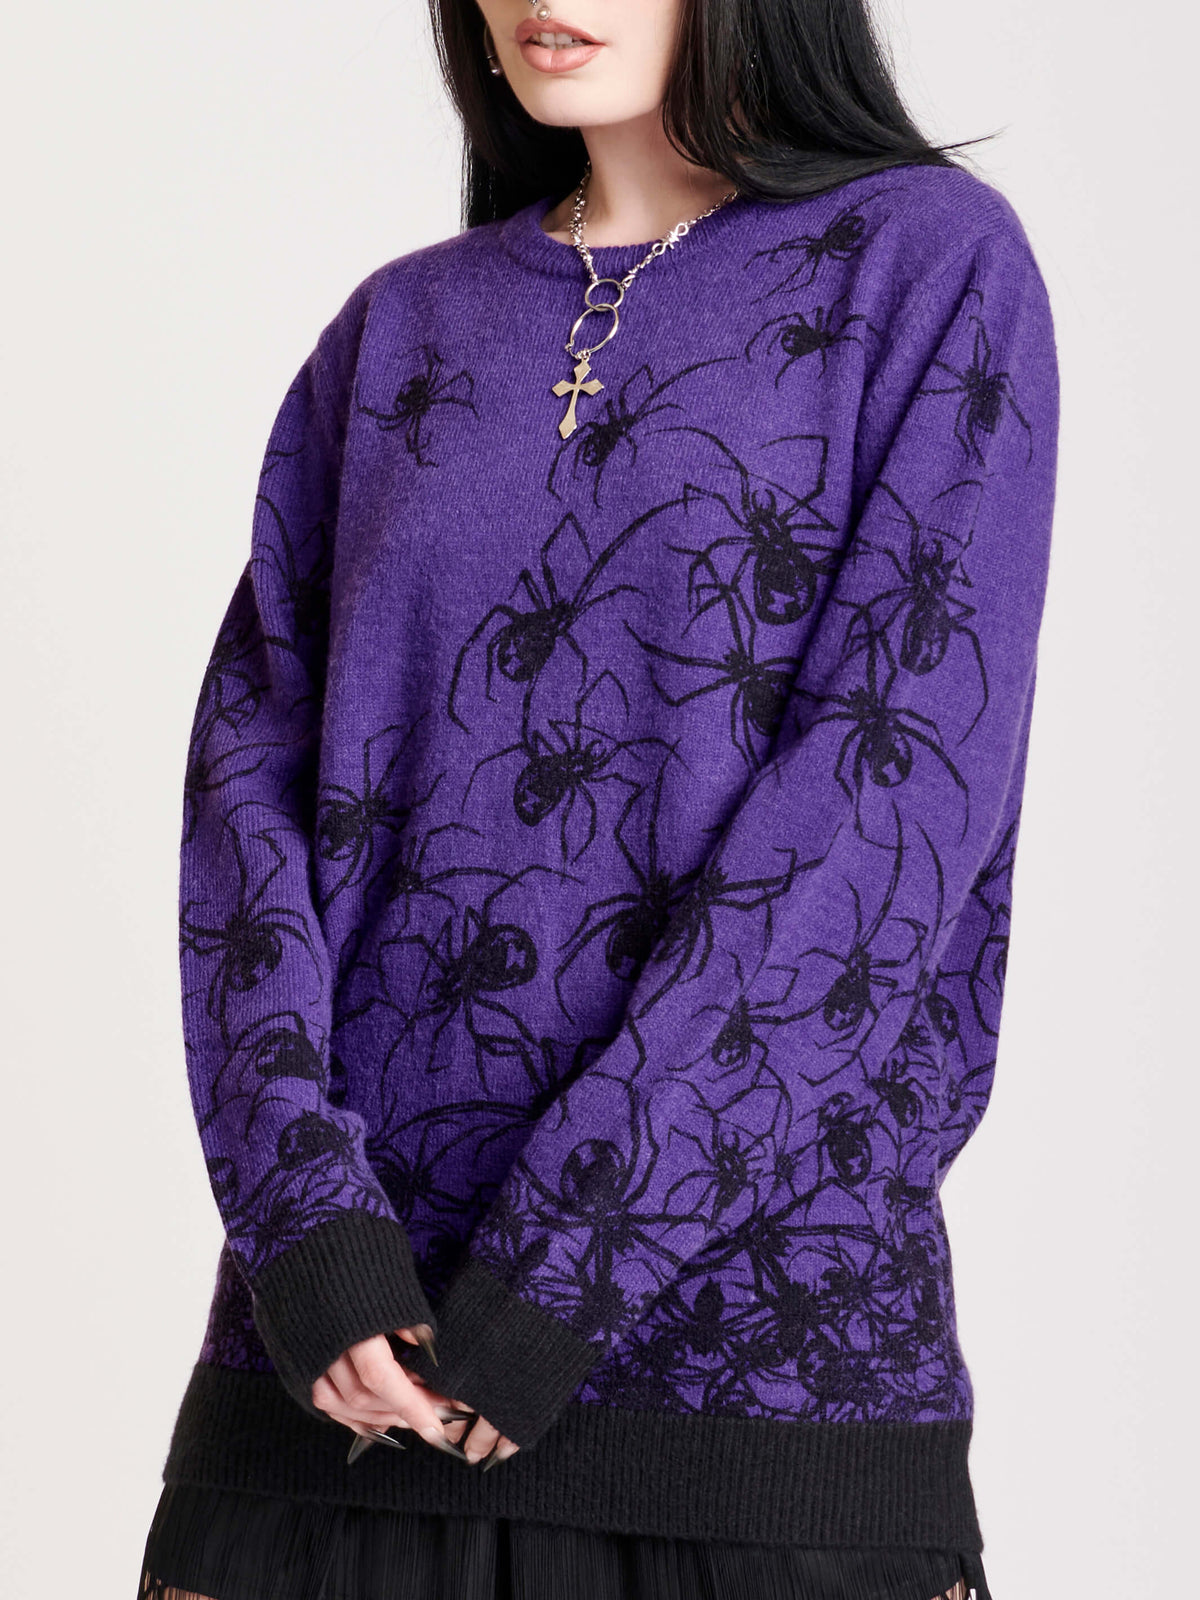 purple and black spider sweater